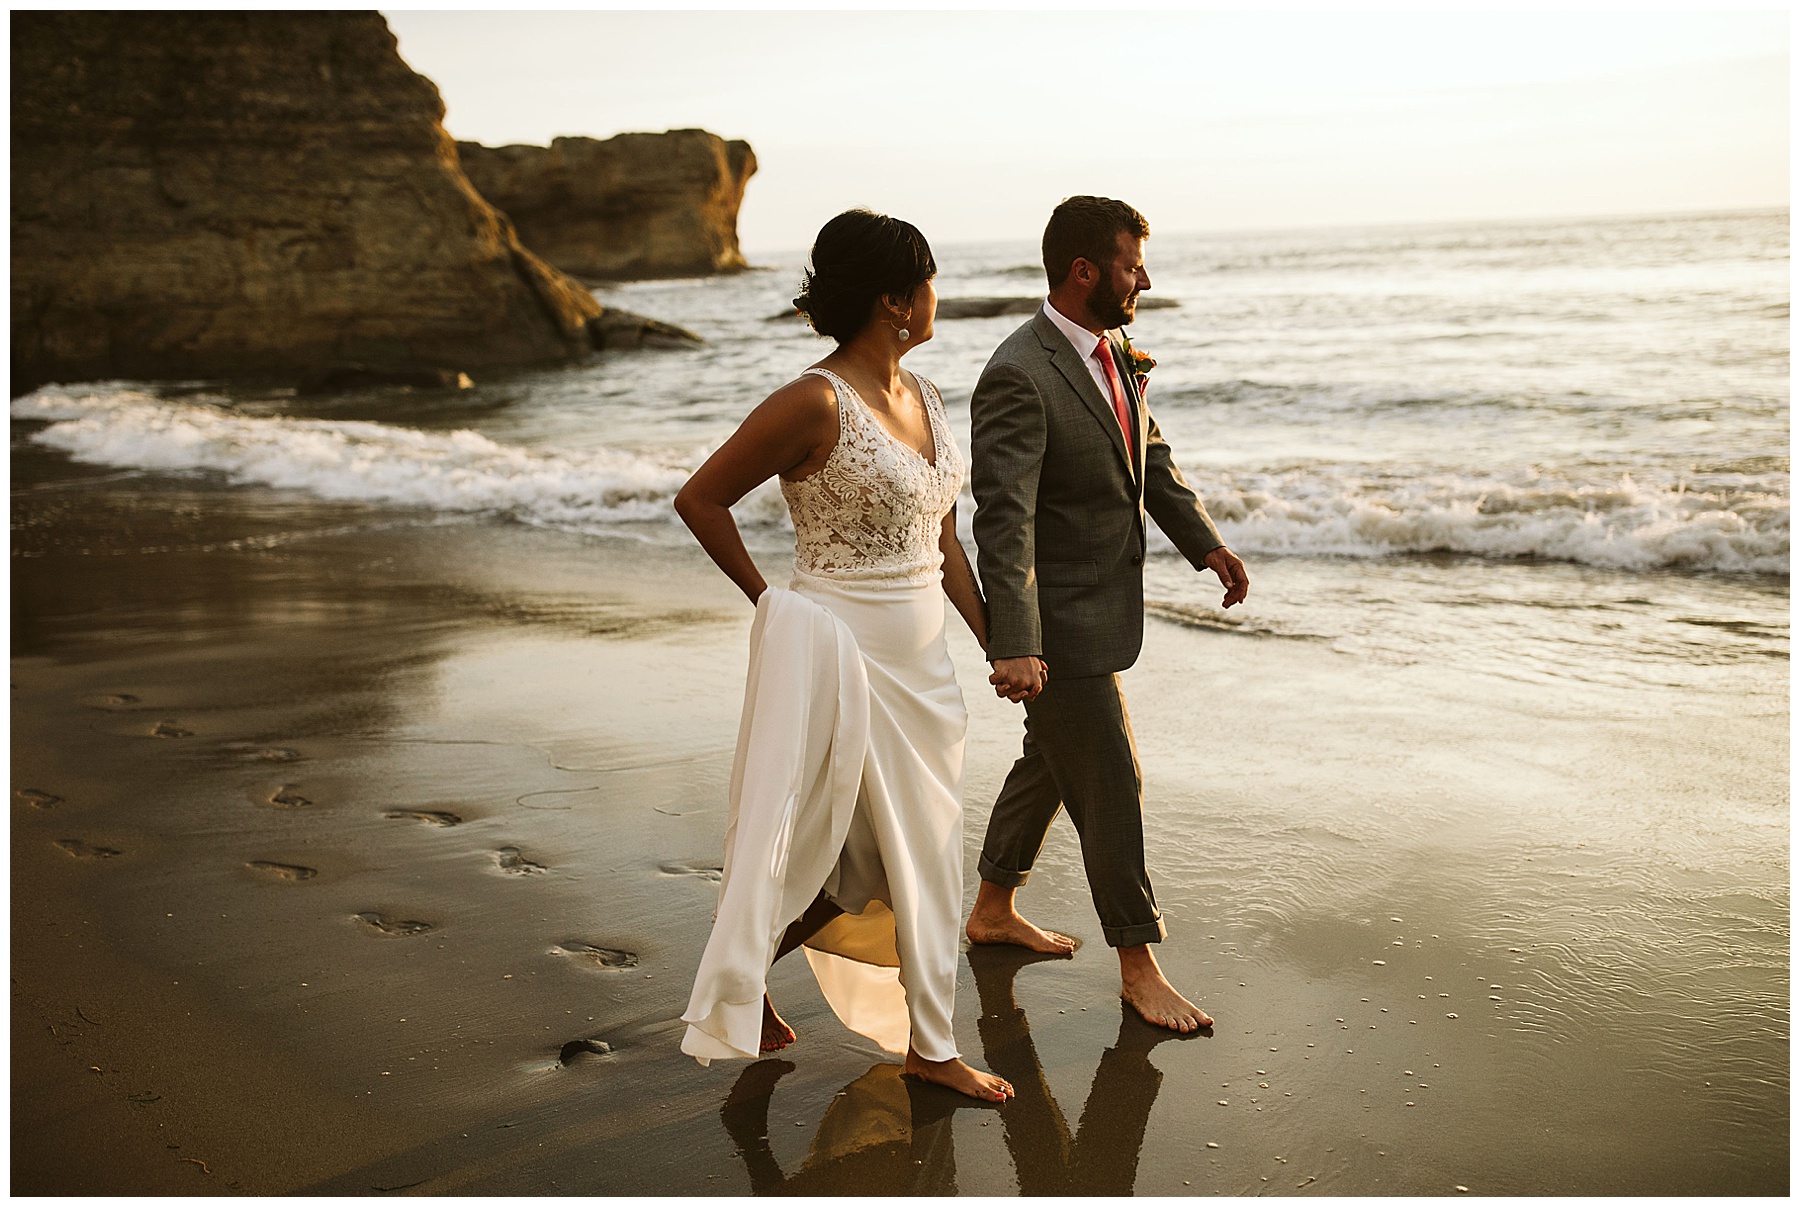 couple explores the beach in their wedding attire. they considered the reasons to elope and wanted a stress free experience like this!